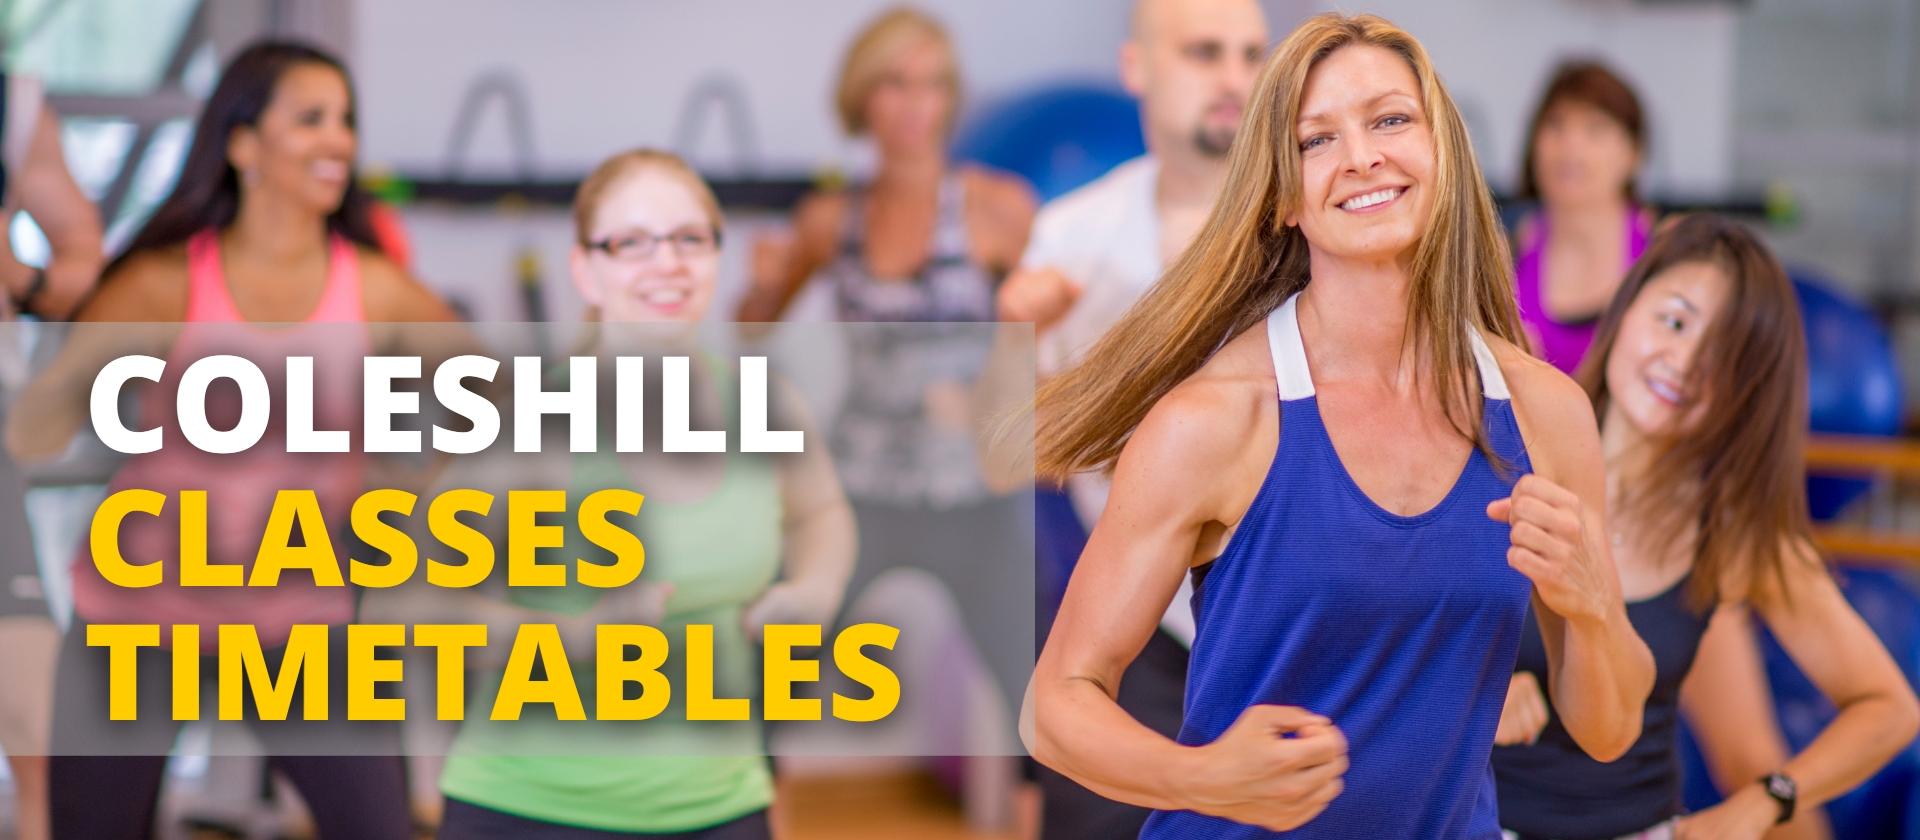 North Warwickshire leisure, Coleshill exercise and fitness classes timetables